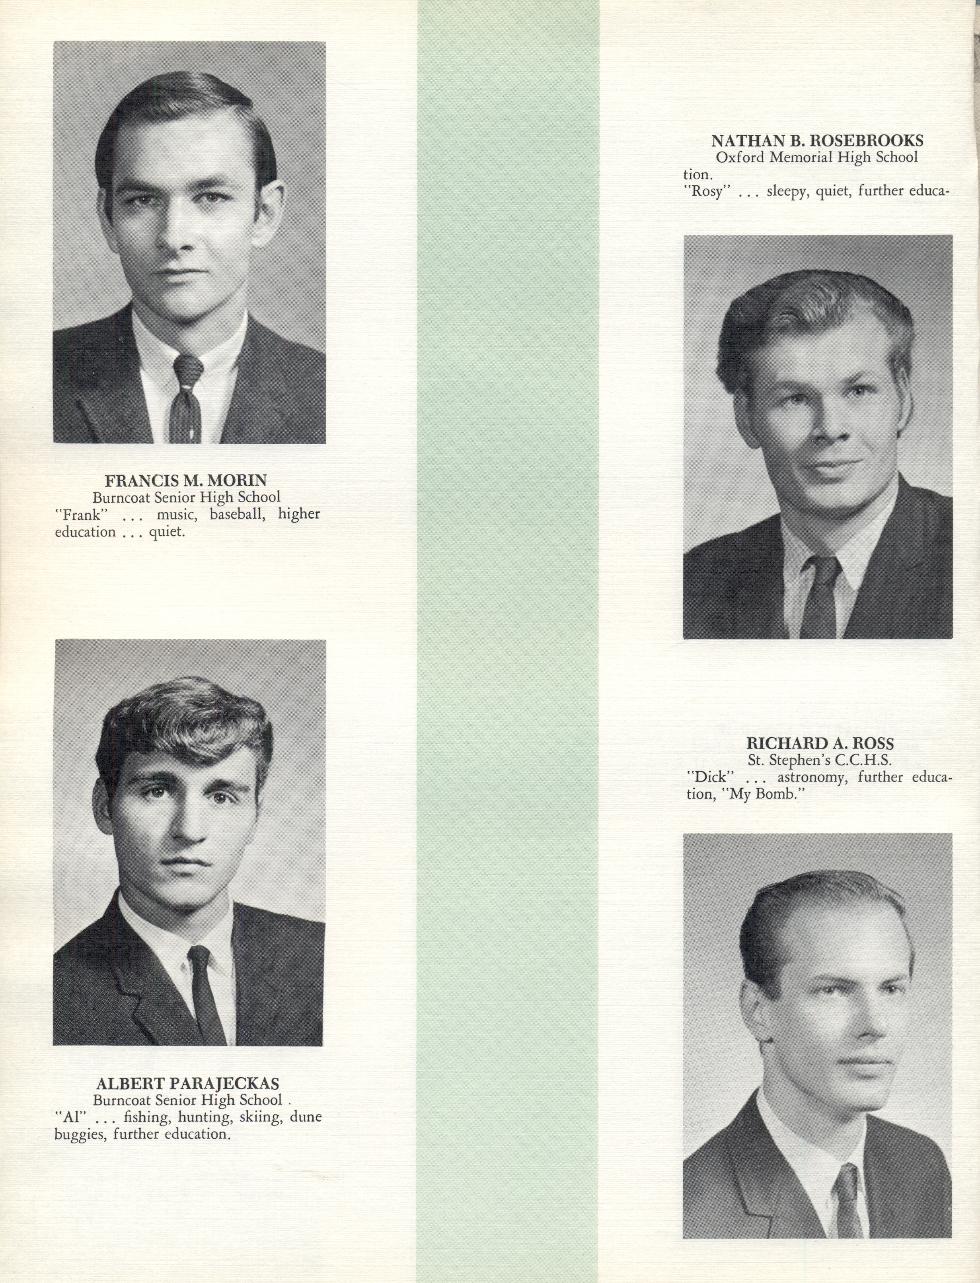 Worcester Industrial Technical Institute Class of 1968 - Mechanical Technology